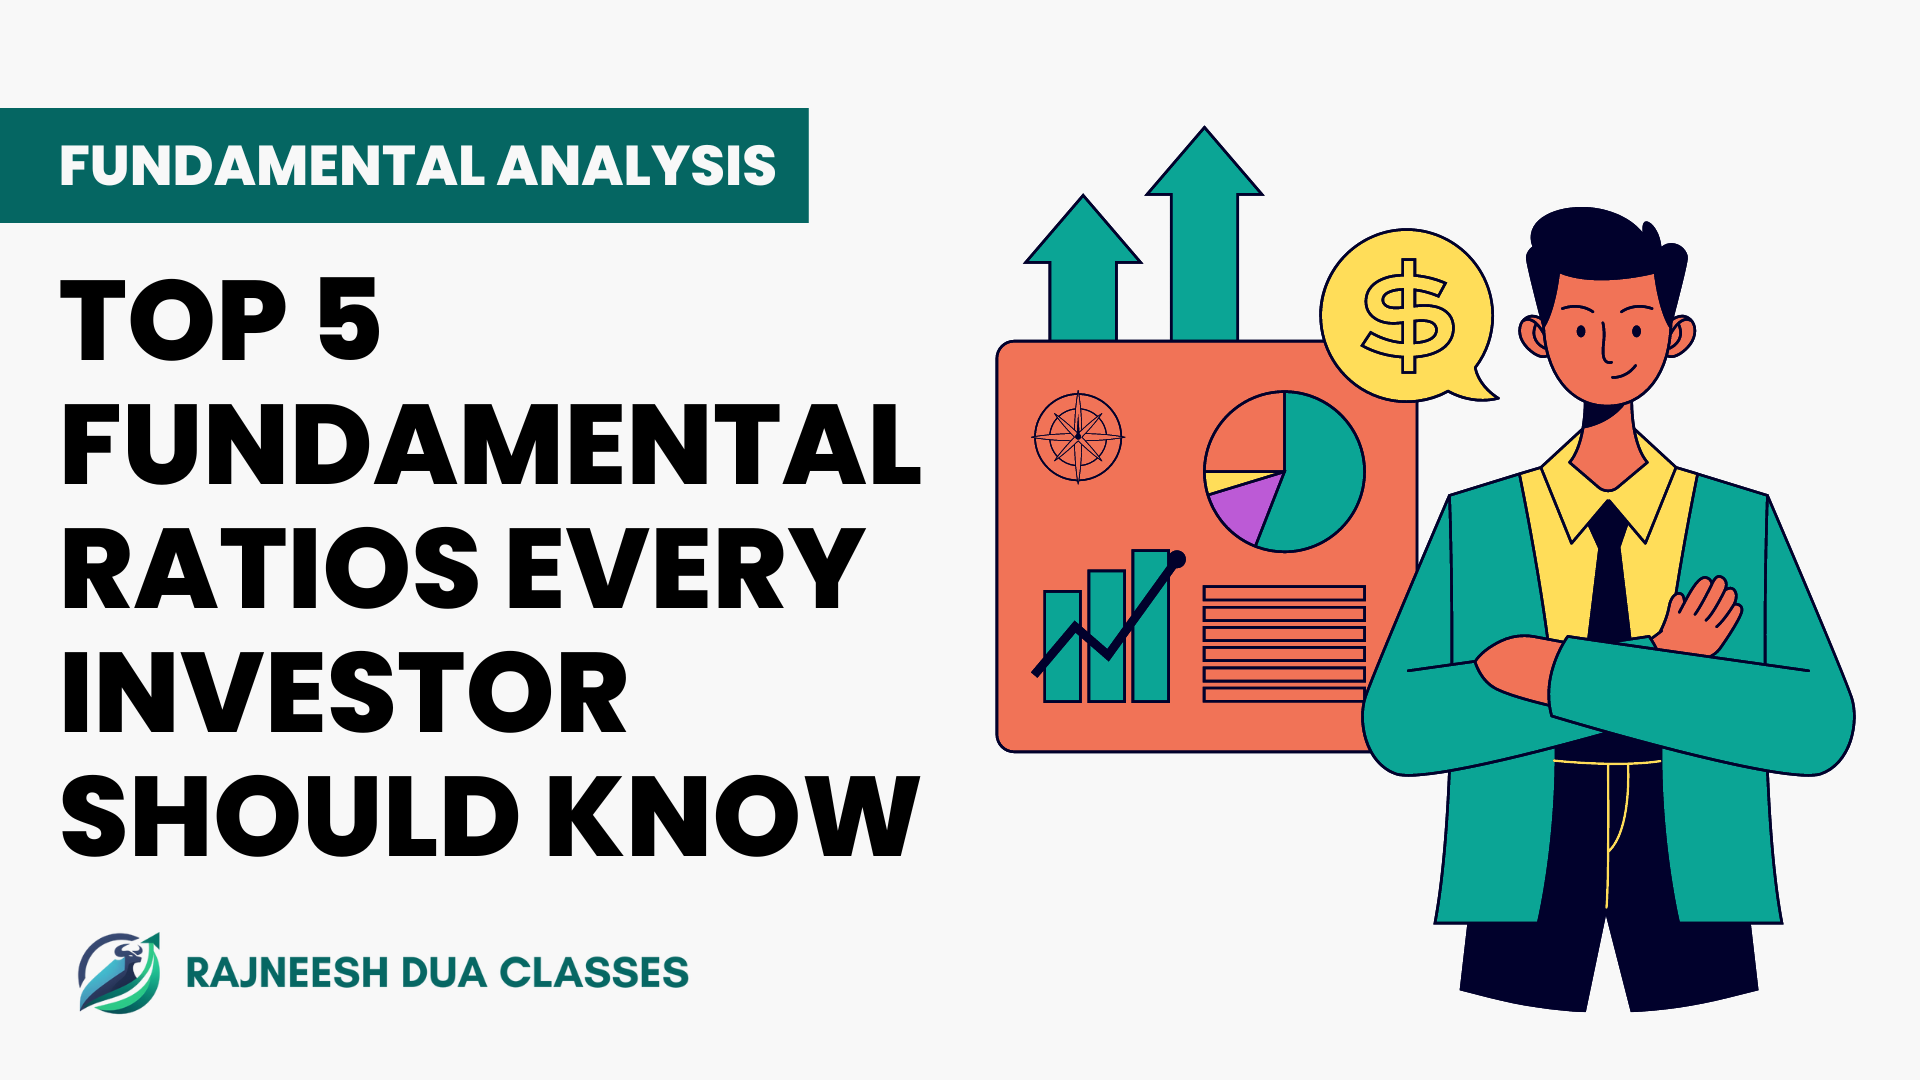 Top 5 Fundamental Ratios Every Investor Should Know